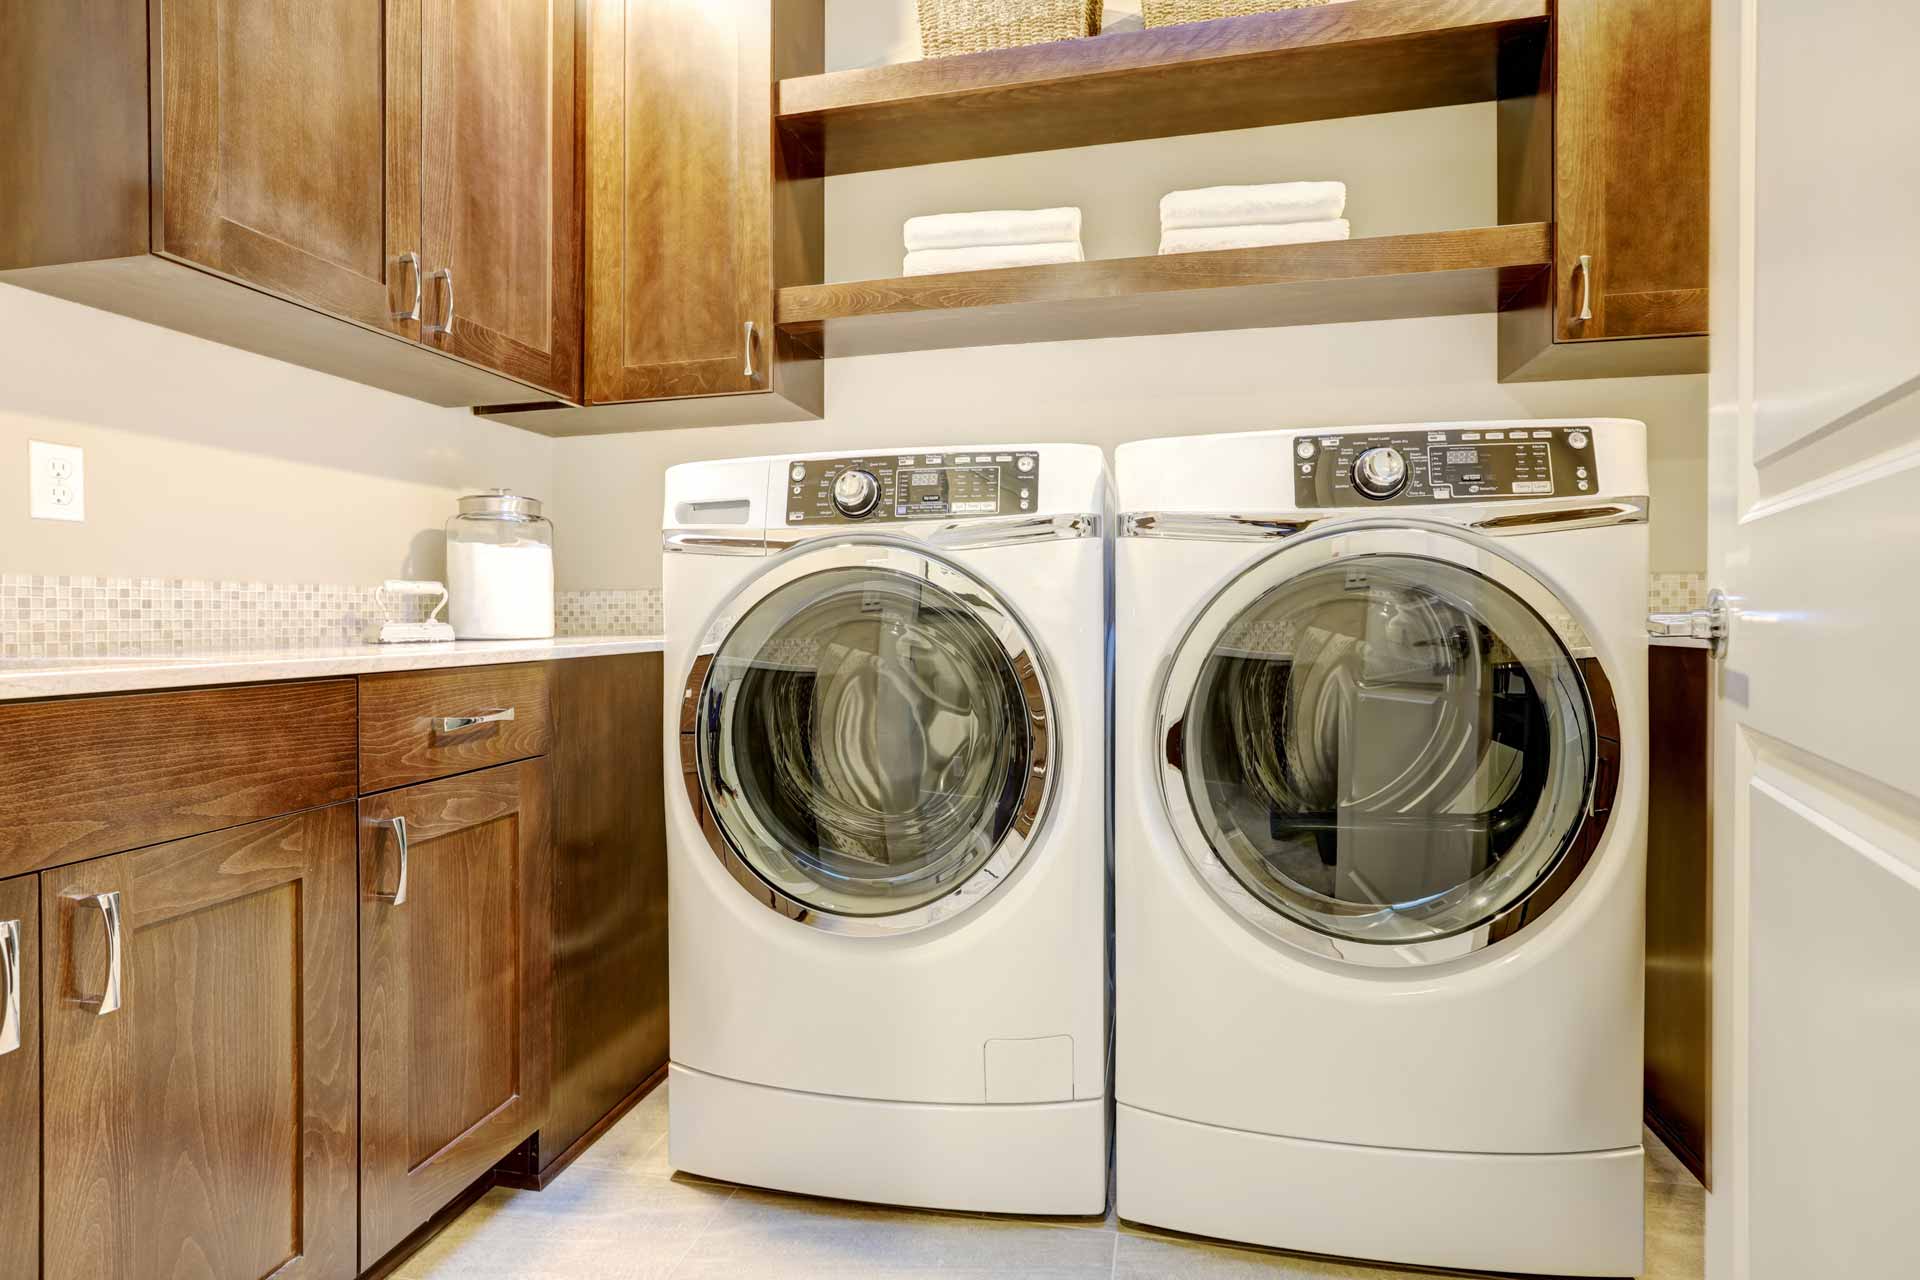 Washer/dryer matching set in clean laundry room